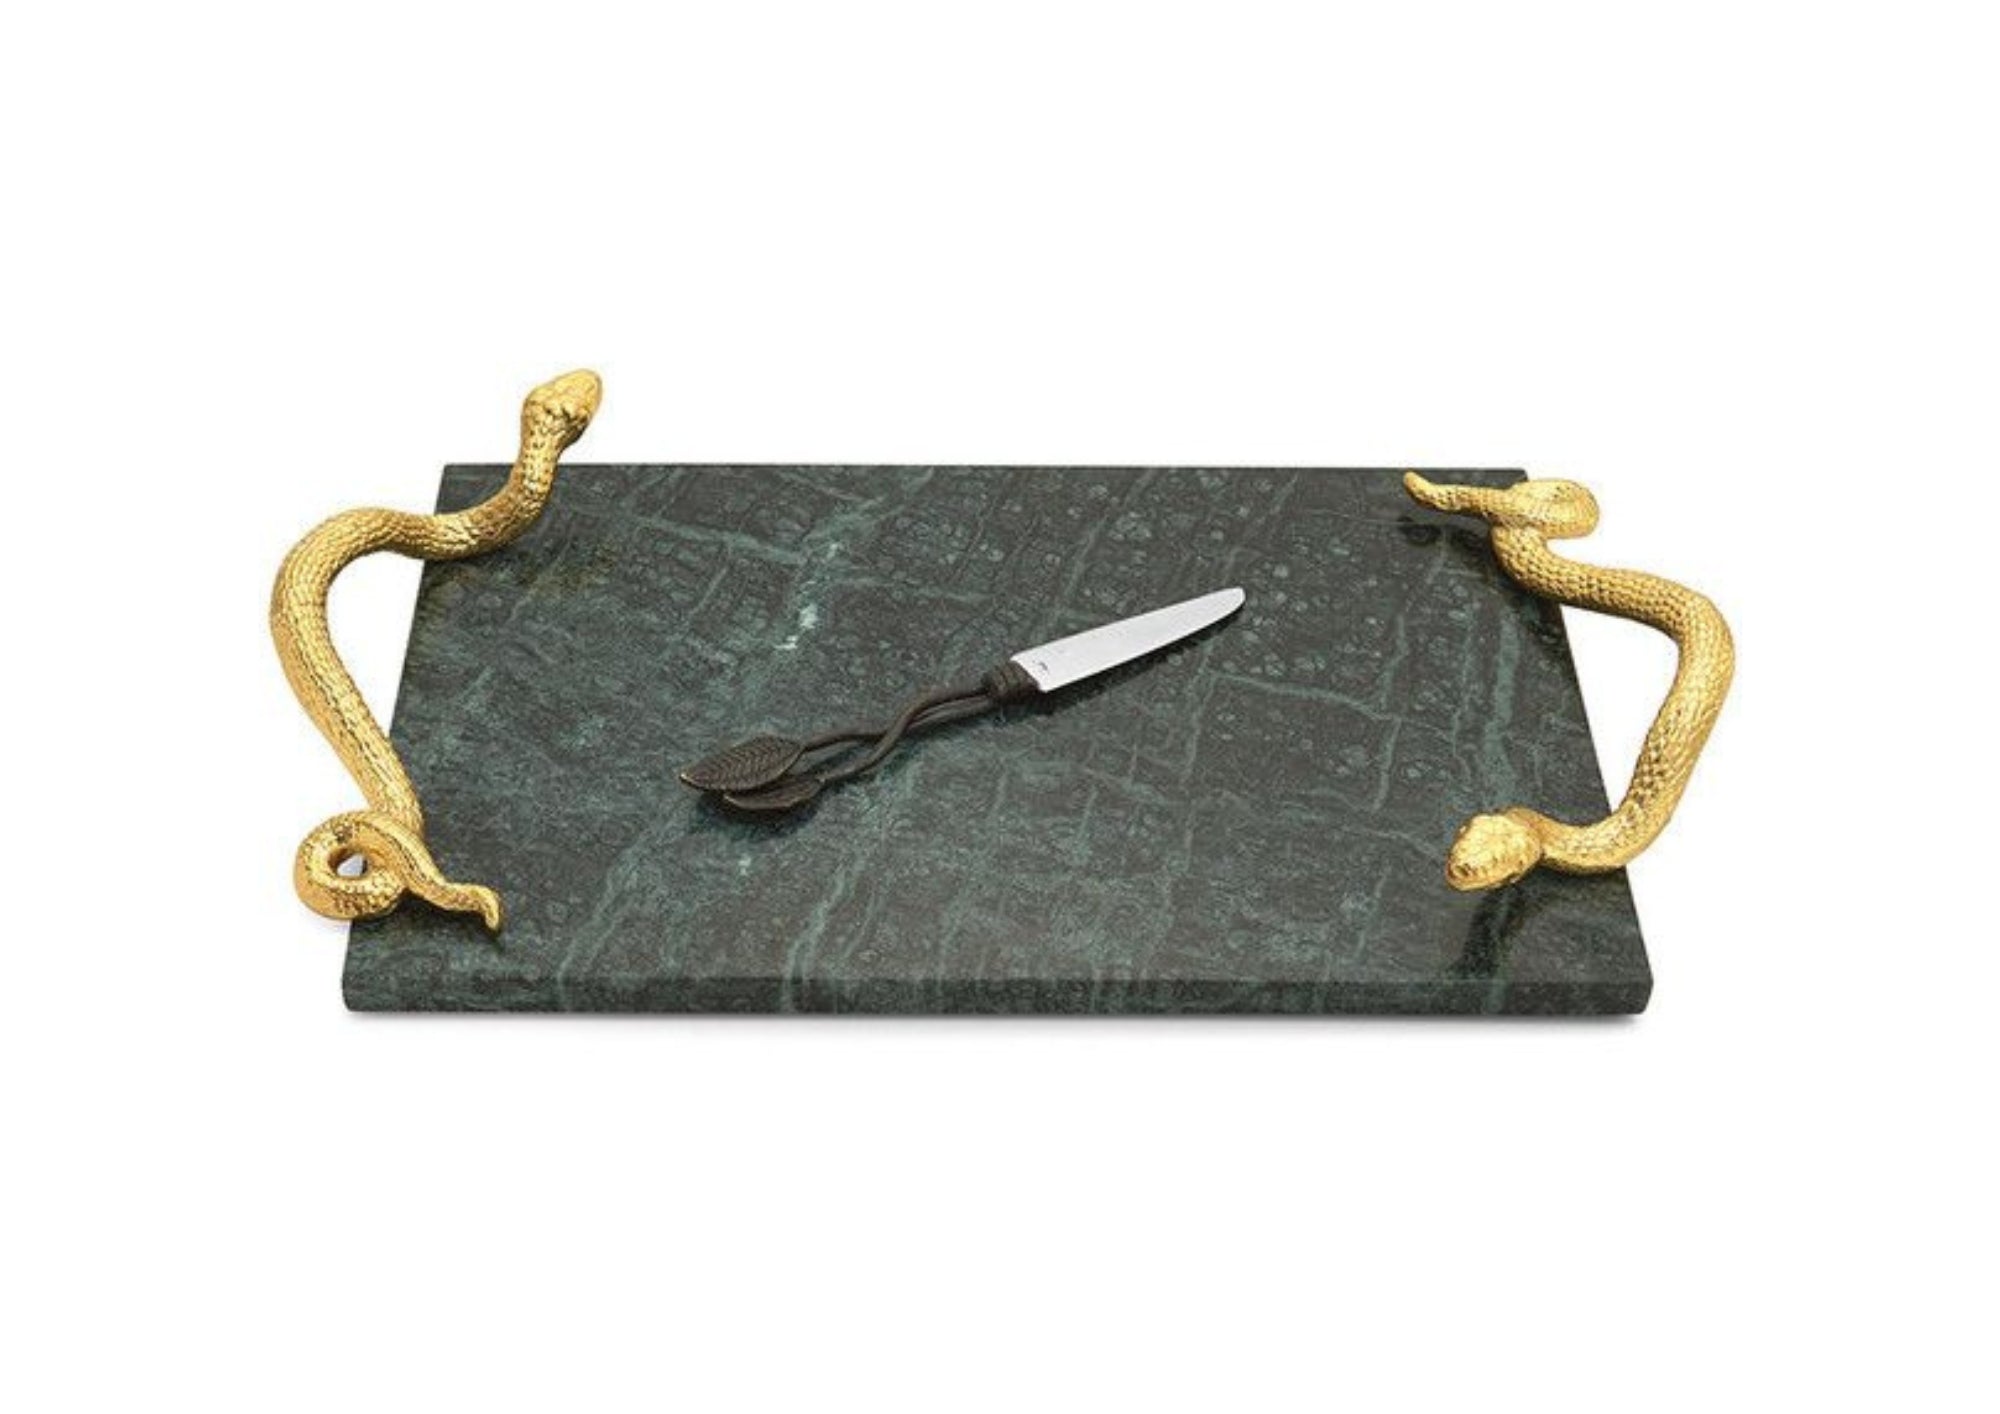 Rainforest Cheese Board with Knife